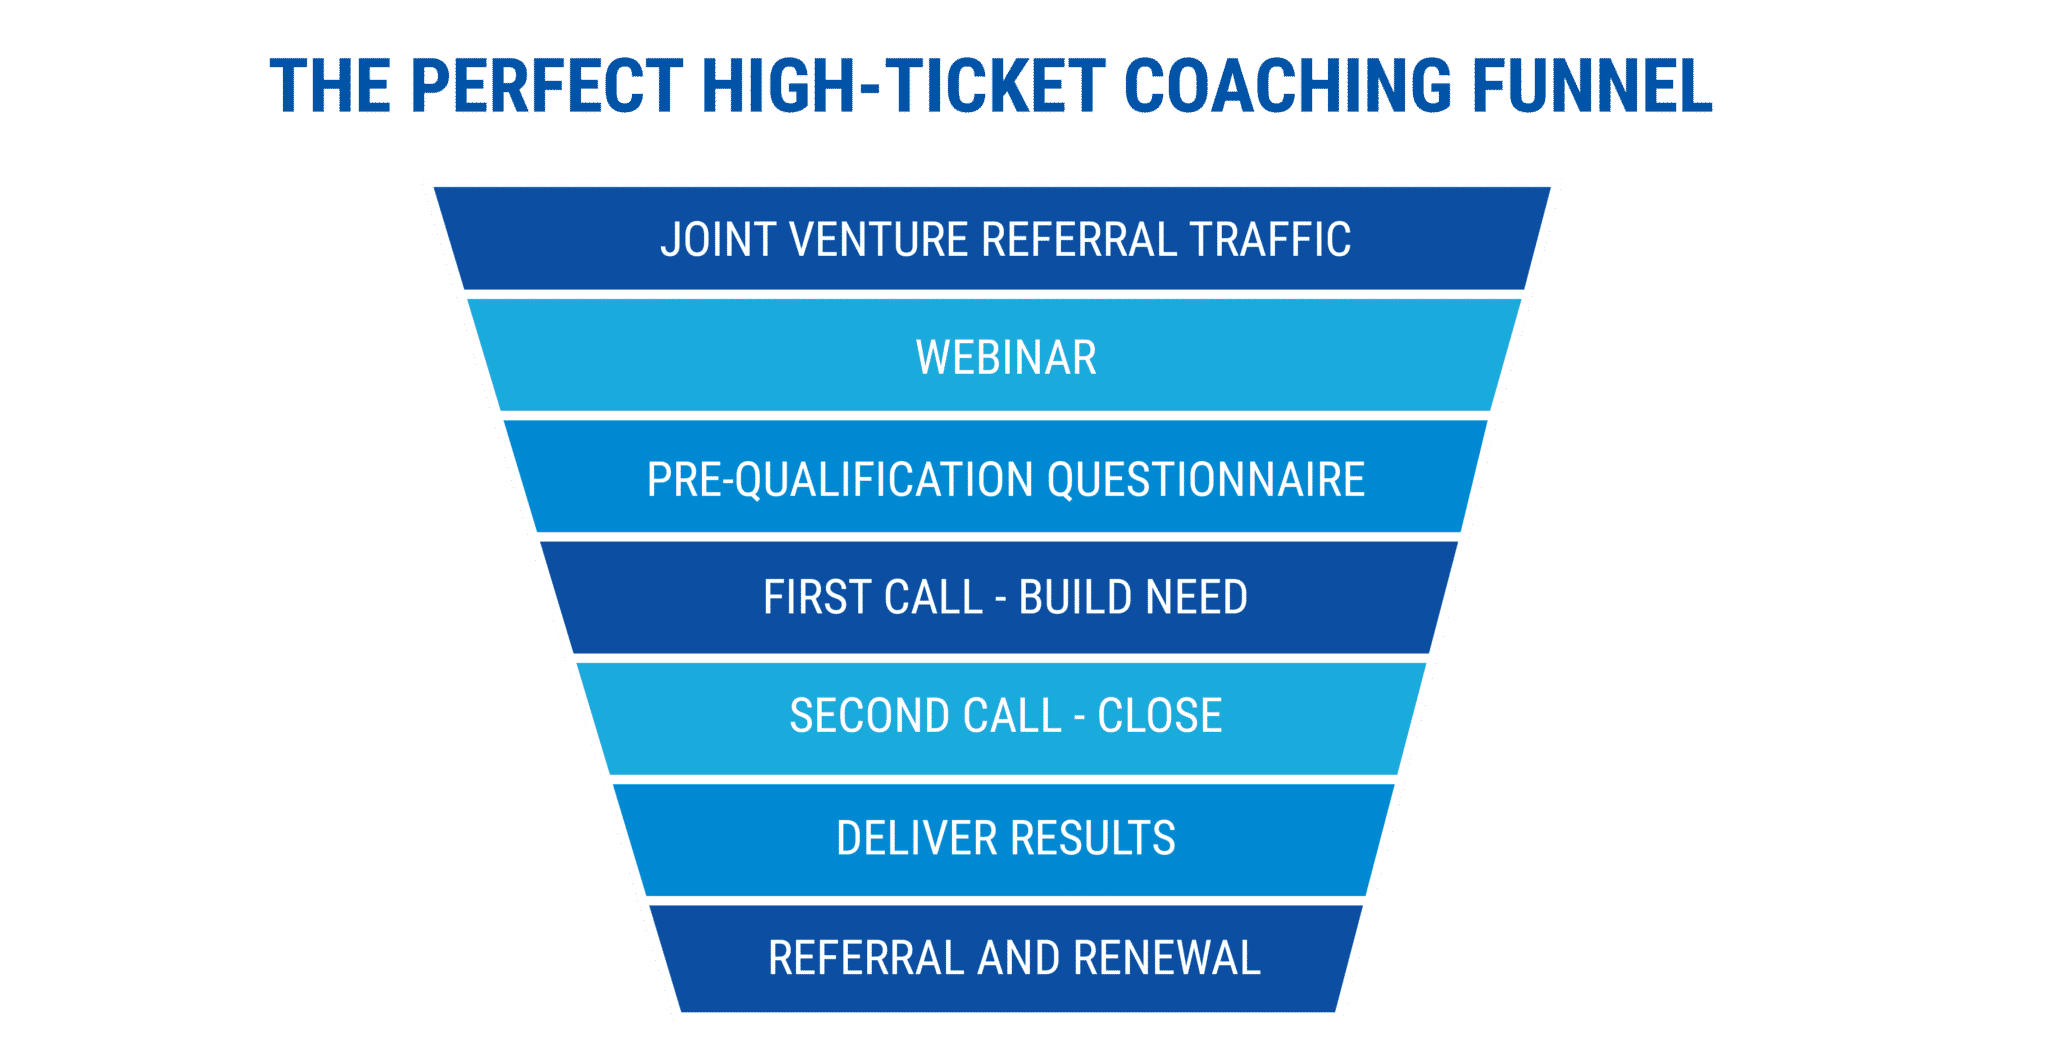 the perfect high-ticket coaching funnel - starting a coaching business while working full-time